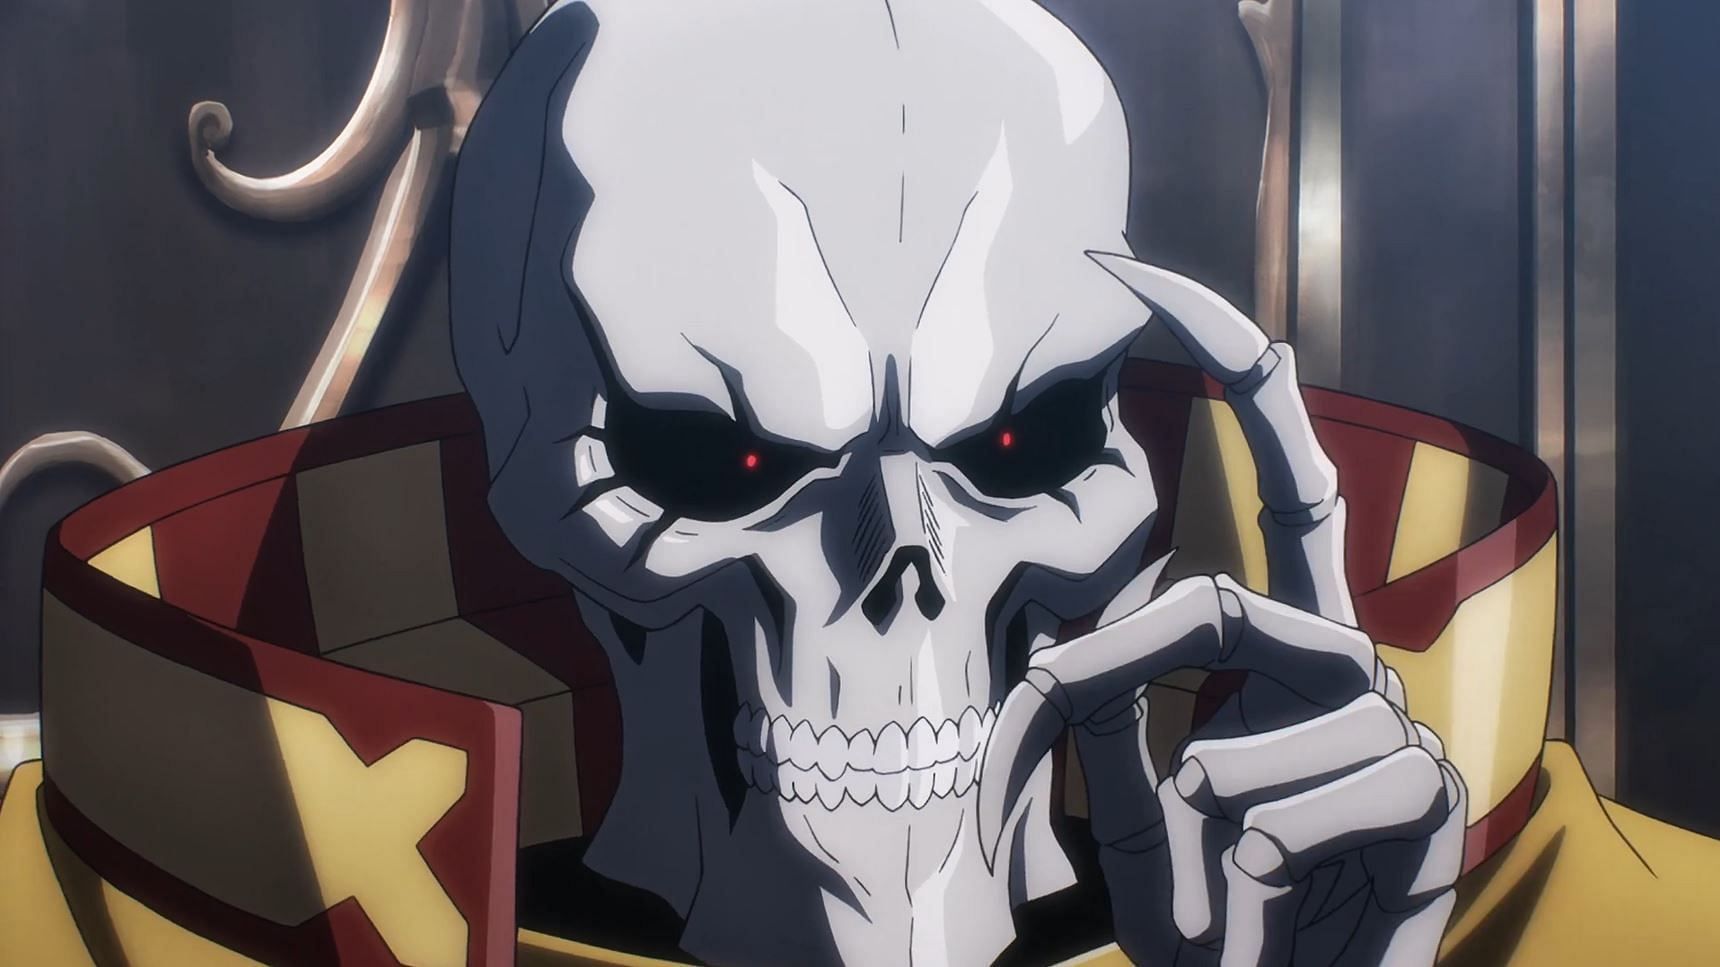 Overlord Season 4 Episode 3 Release Date and Time